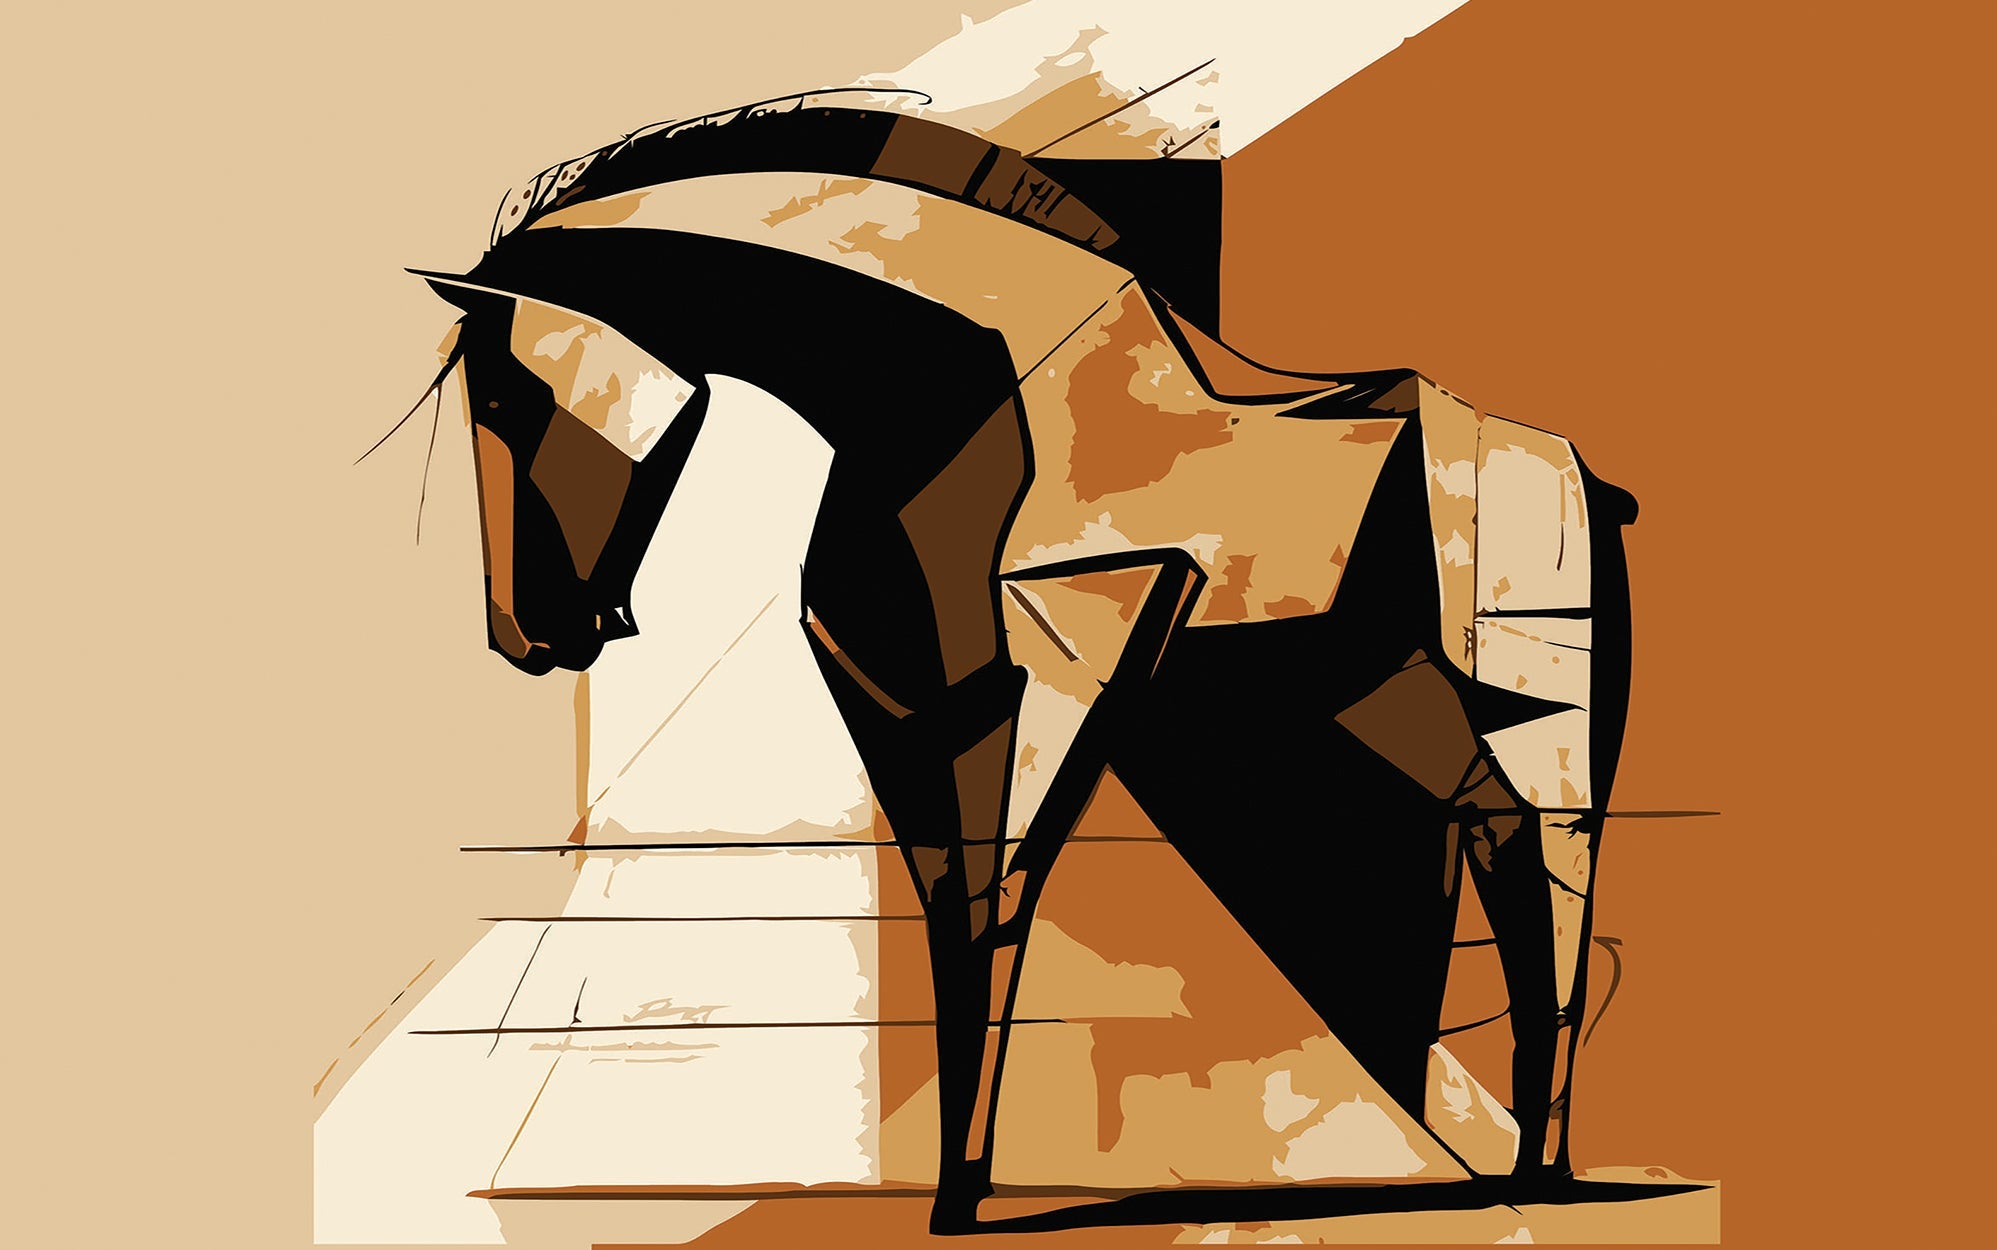 Abstract style mural of a horse on an interior wall